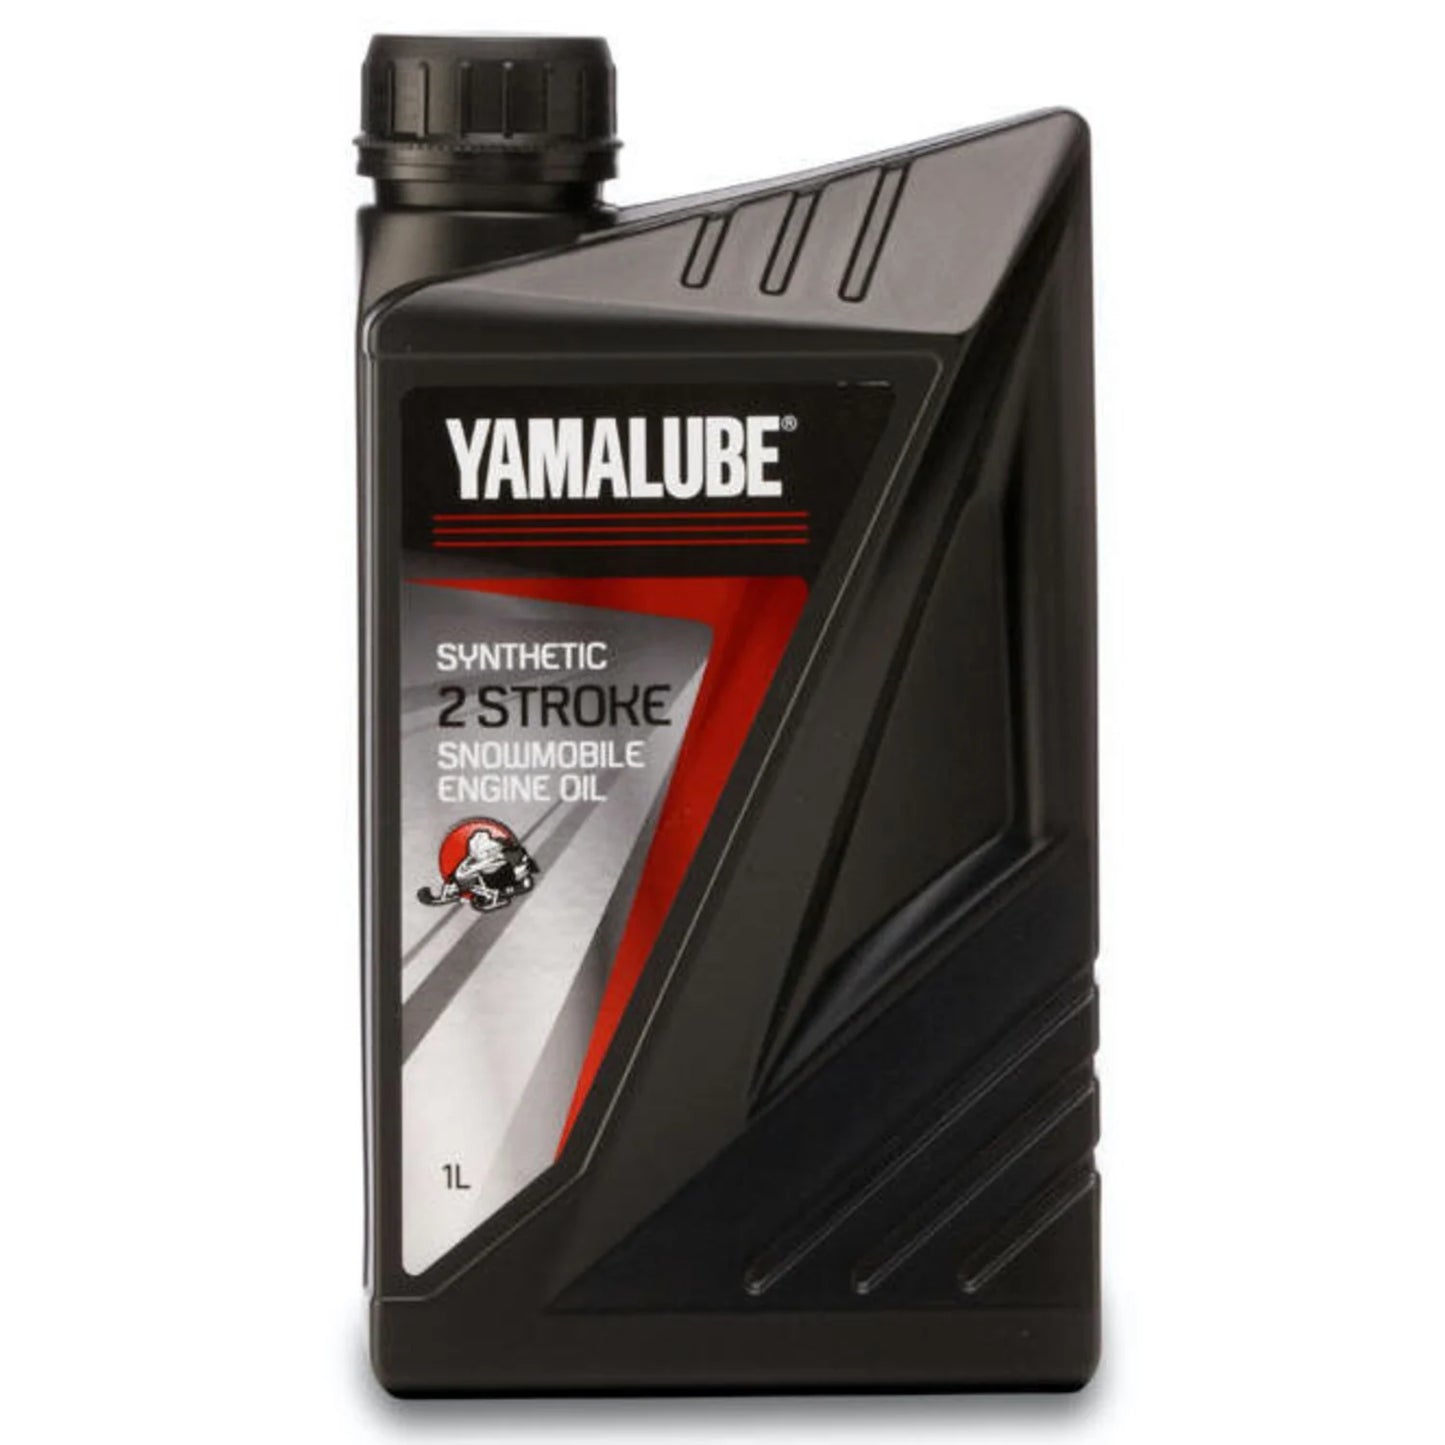 Yamalube Synthetic 2-Stroke Snowmobile Engine Oil